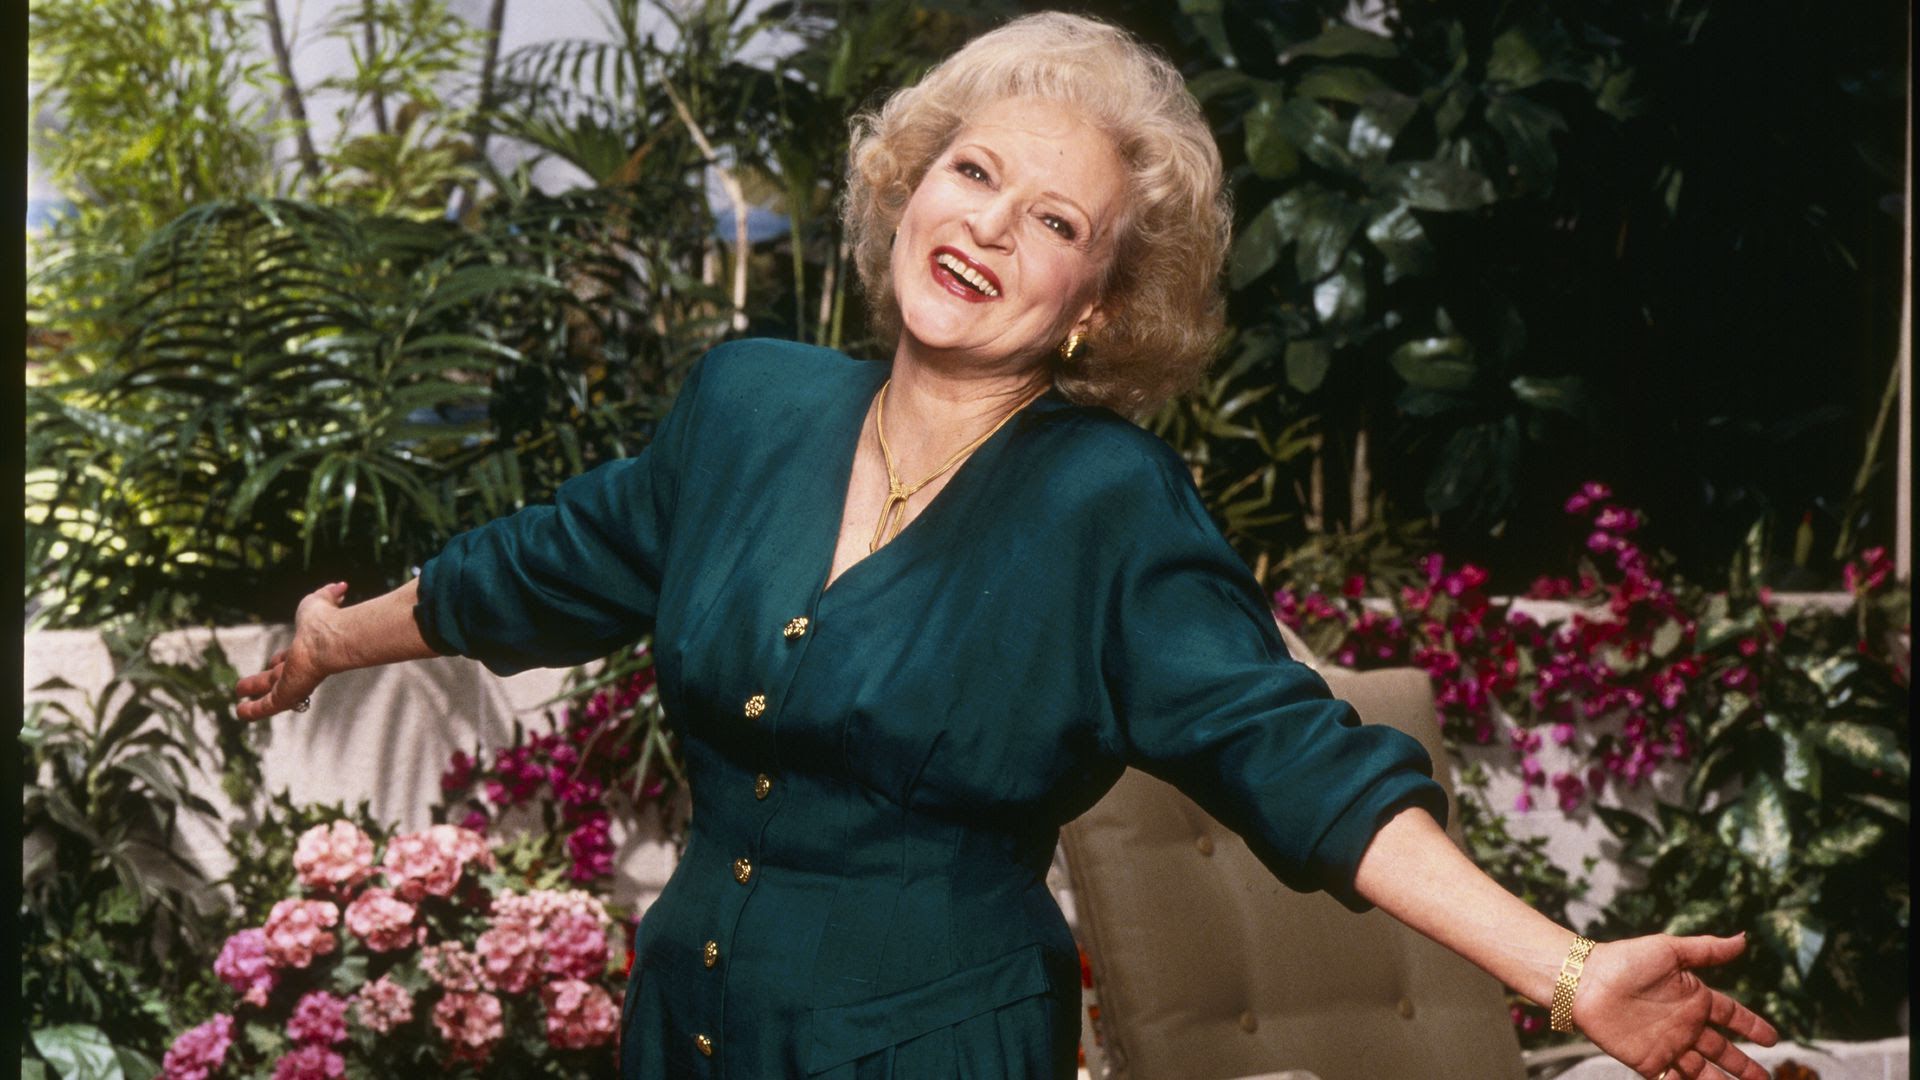 Betty White in a green dress in front of a flower garden.